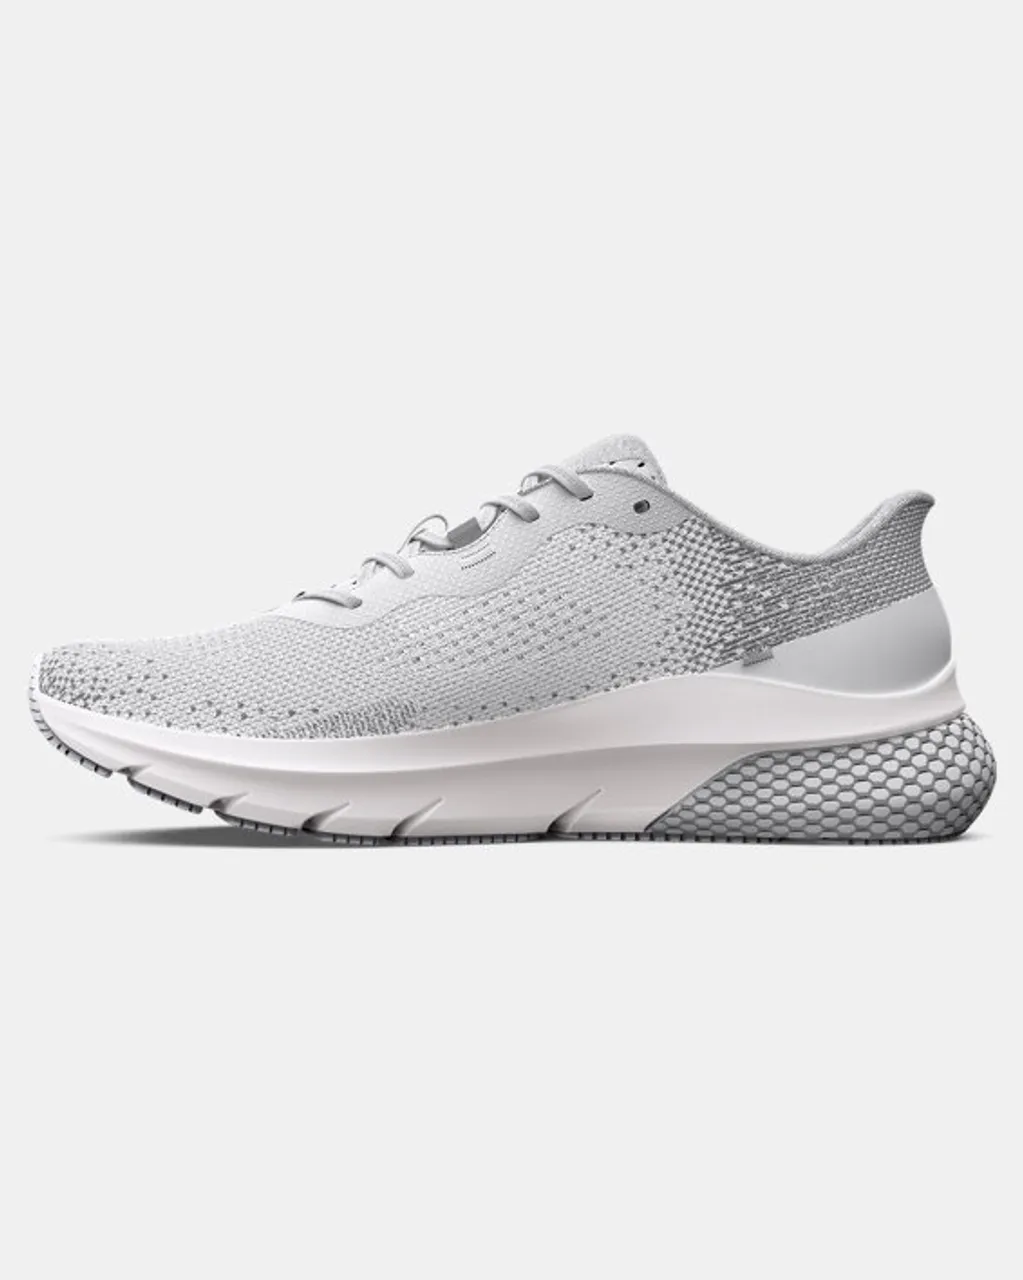 Women's  Under Armour  HOVR™ Turbulence 2 Running Shoes White / White / Metallic Silver